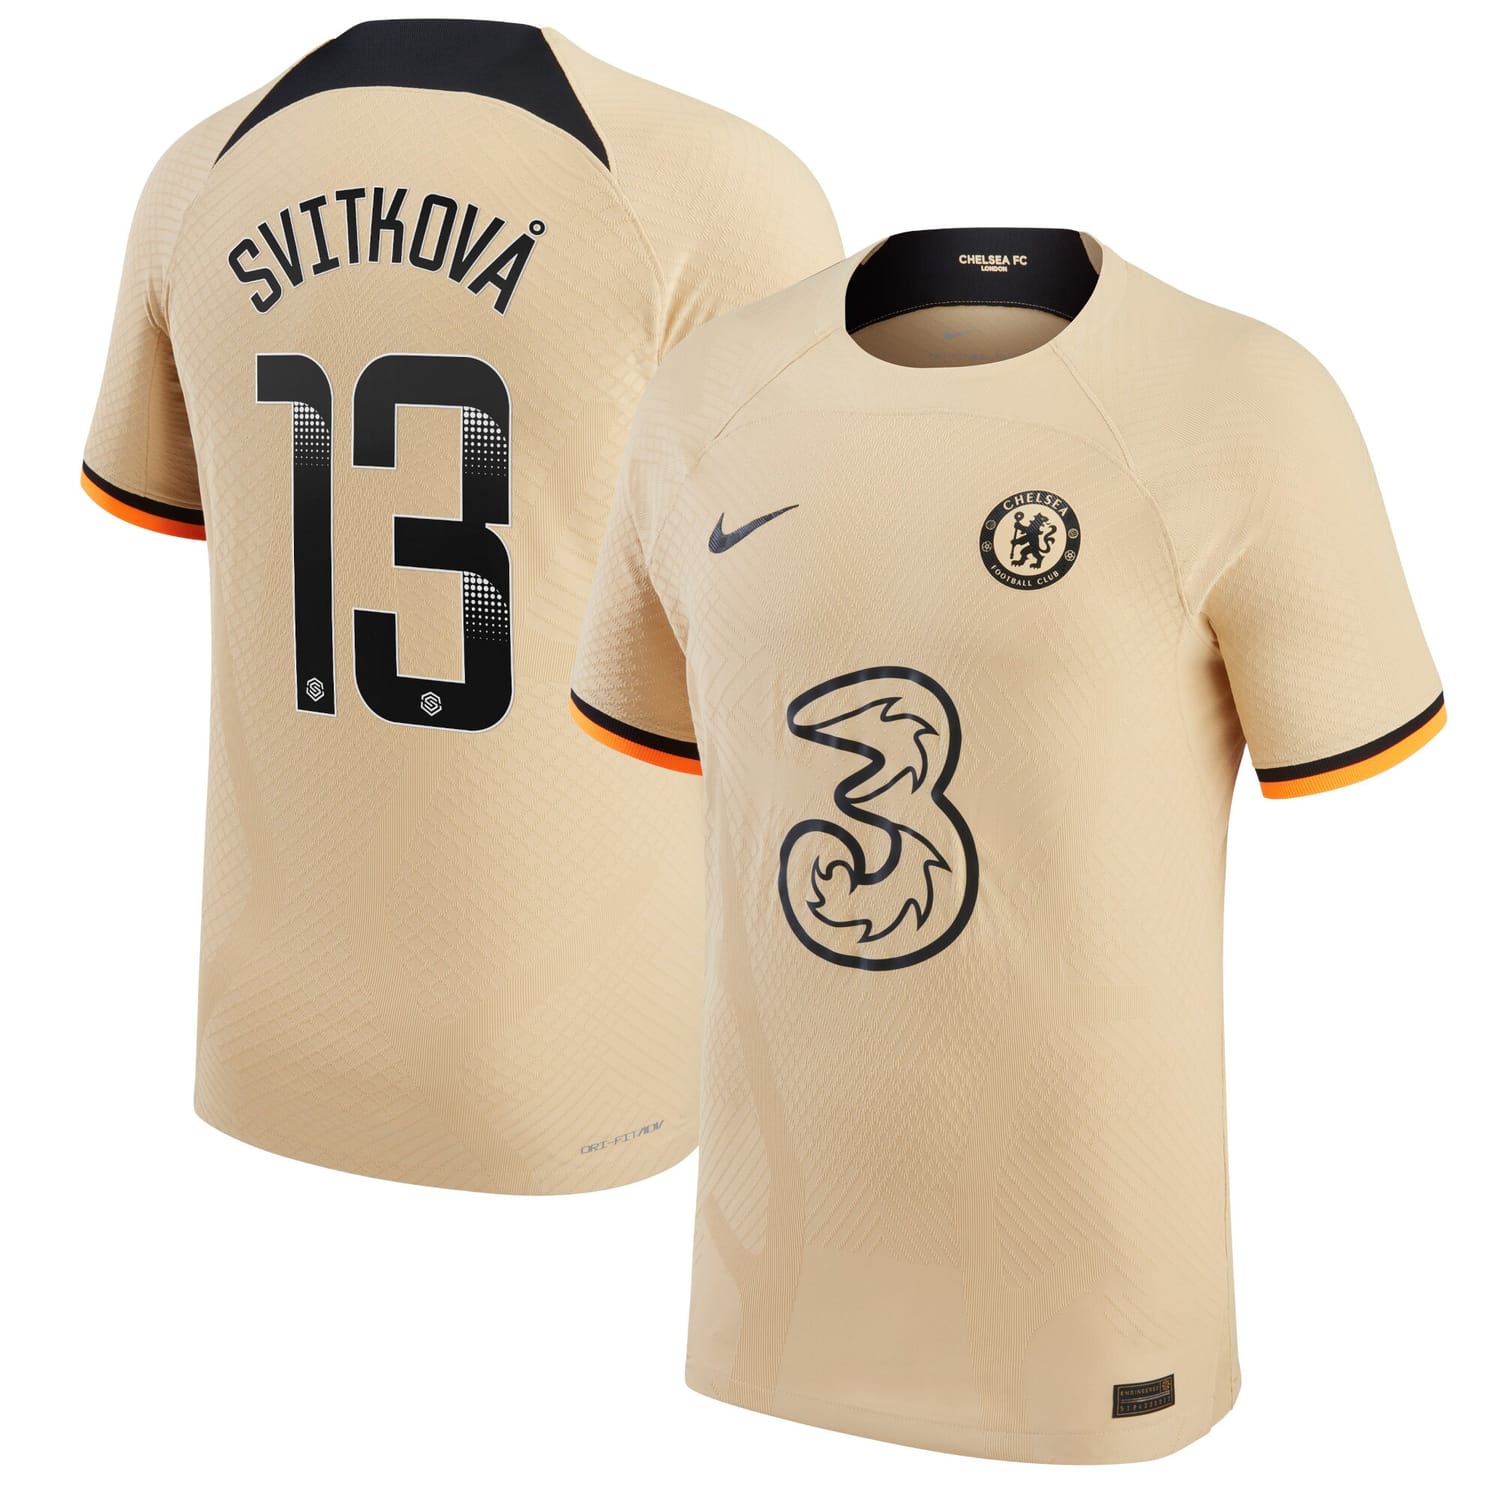 Premier League Chelsea Third WSL Authentic Jersey Shirt 2022-23 player Katerina Svitková 13 printing for Men